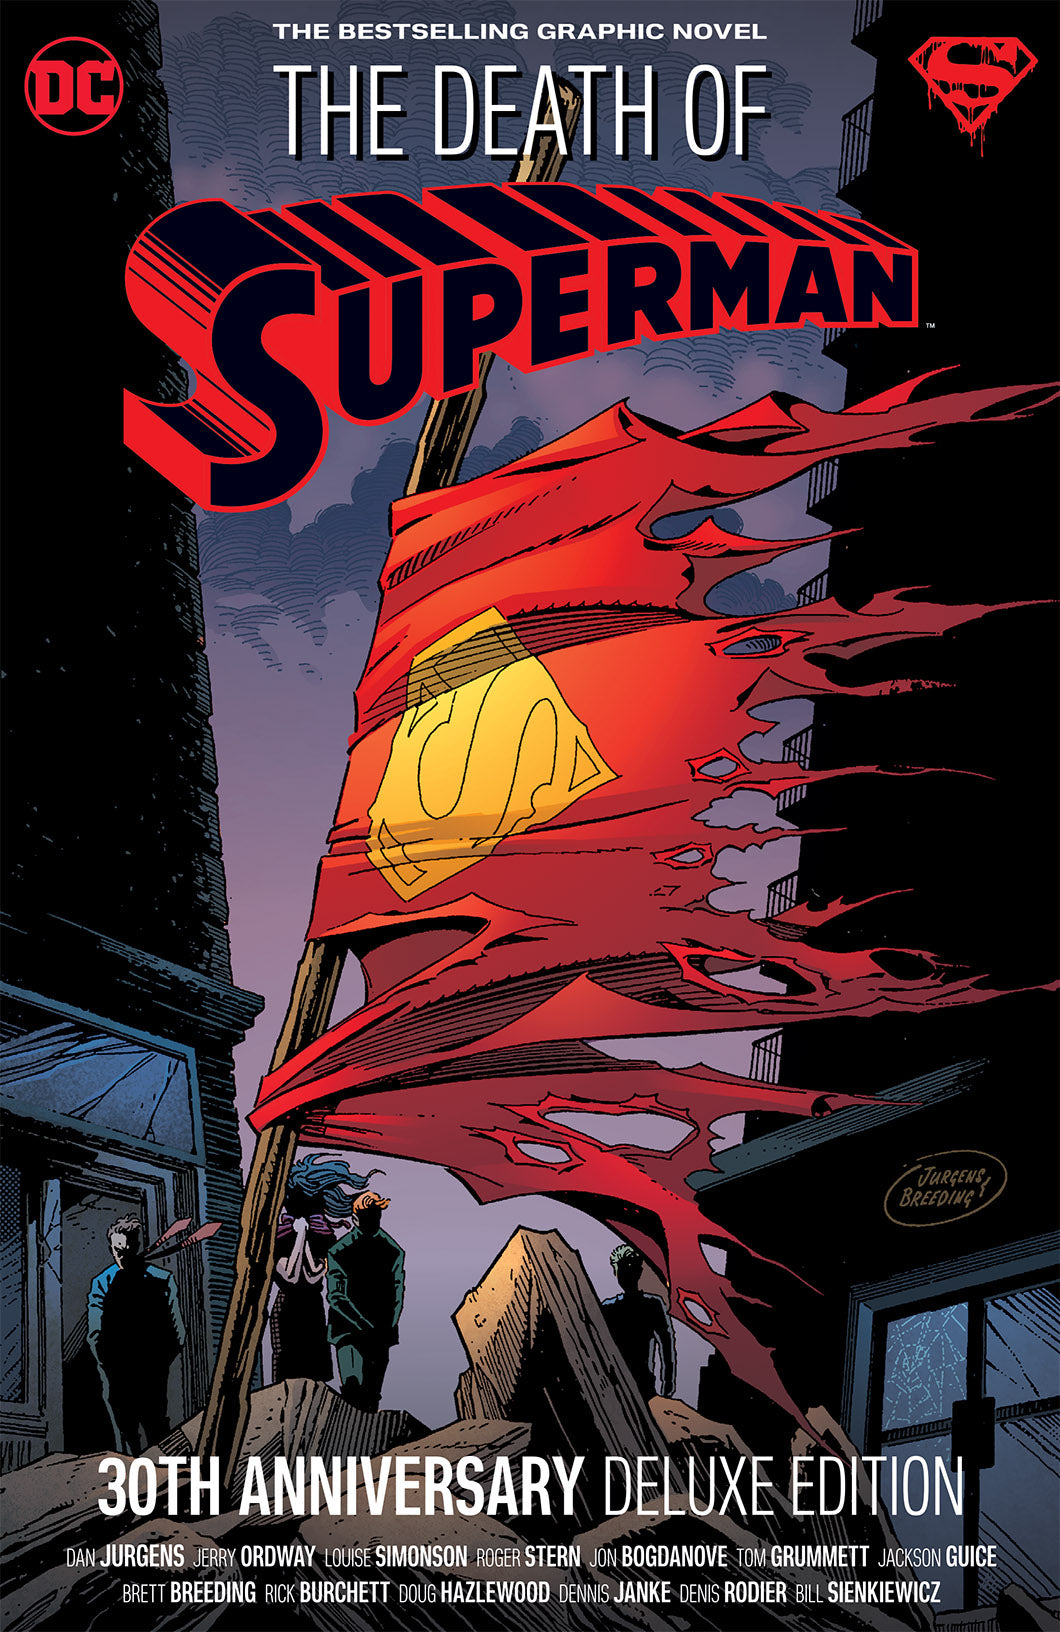 DEATH OF SUPERMAN 30TH ANNIVERSARY DELUXE EDITION HARDCOVER